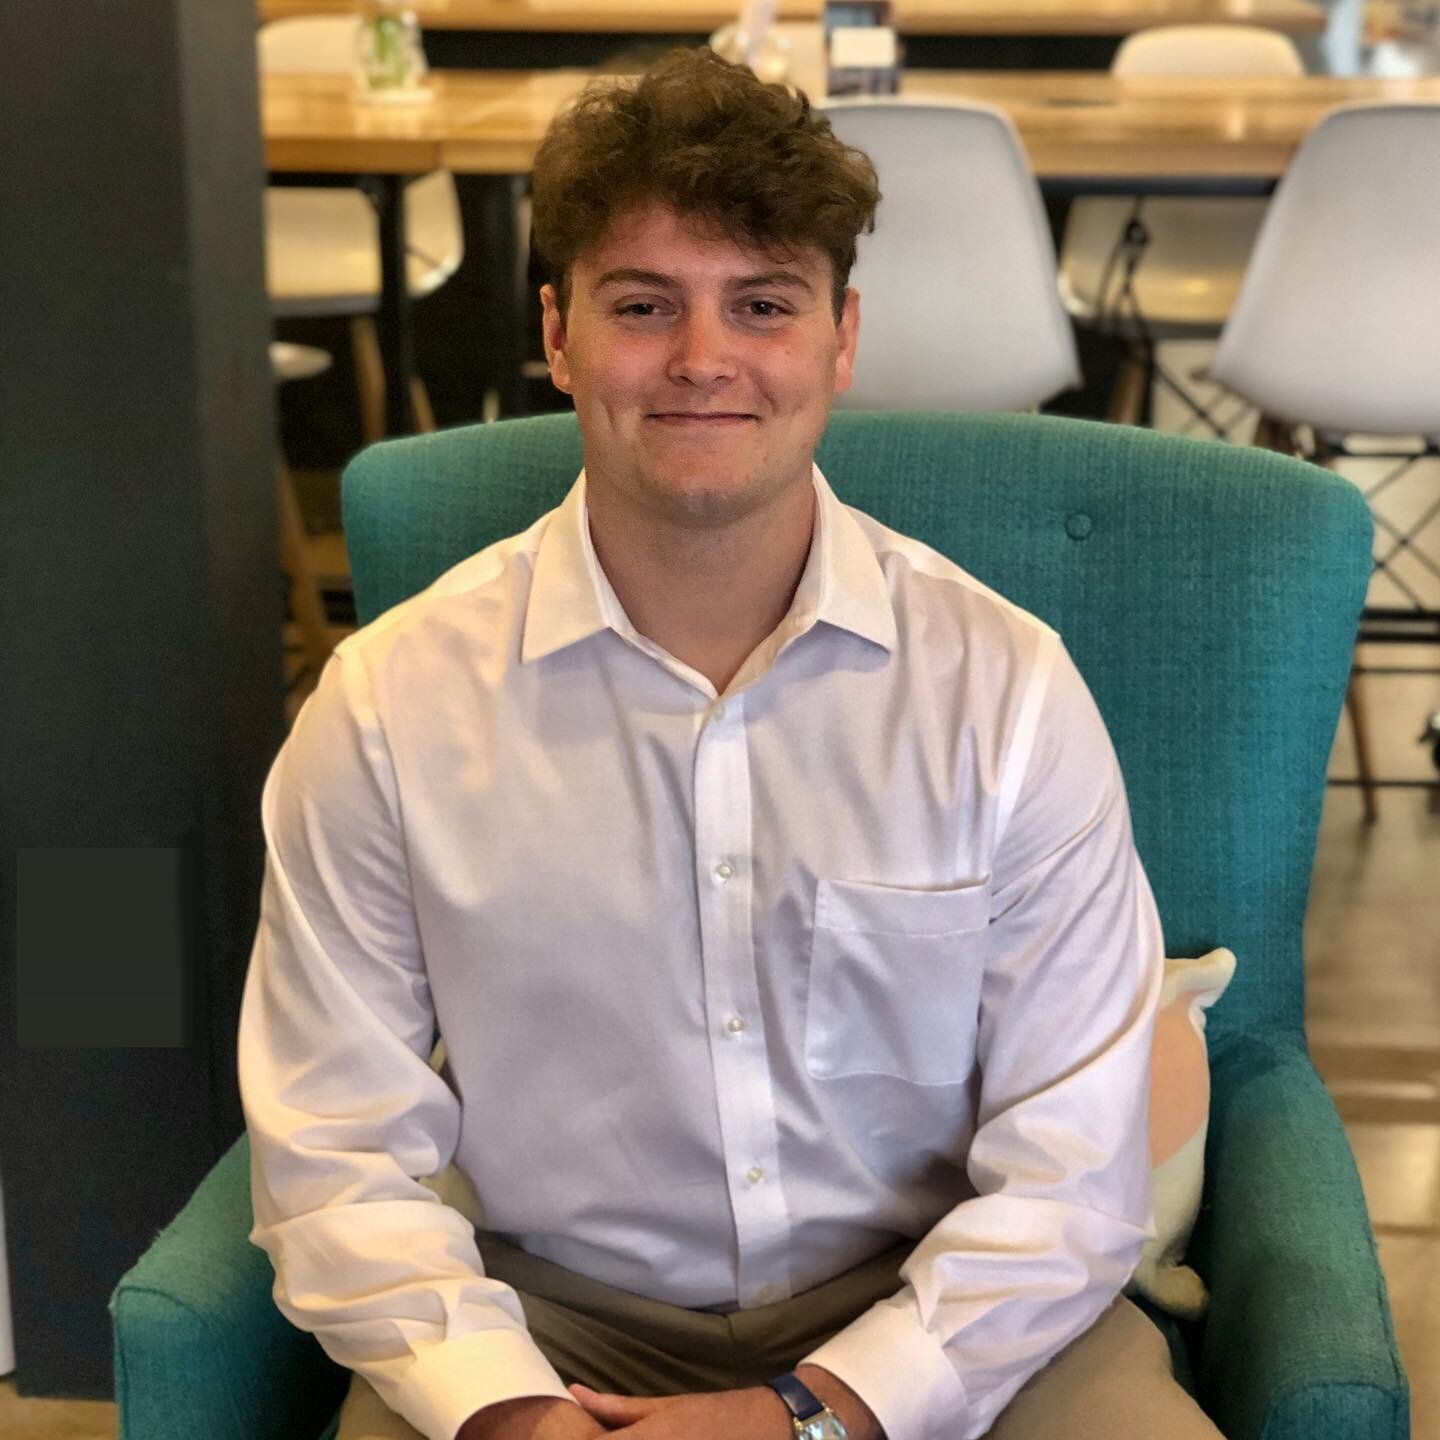 Get to know our summer intern, Will Pohlmann!

🐝 Will joined the AA Communications team after graduating early from @randolphmacon, where he studied Communications Studies and Journalism.

During his time at RMC, there was always a new story about g